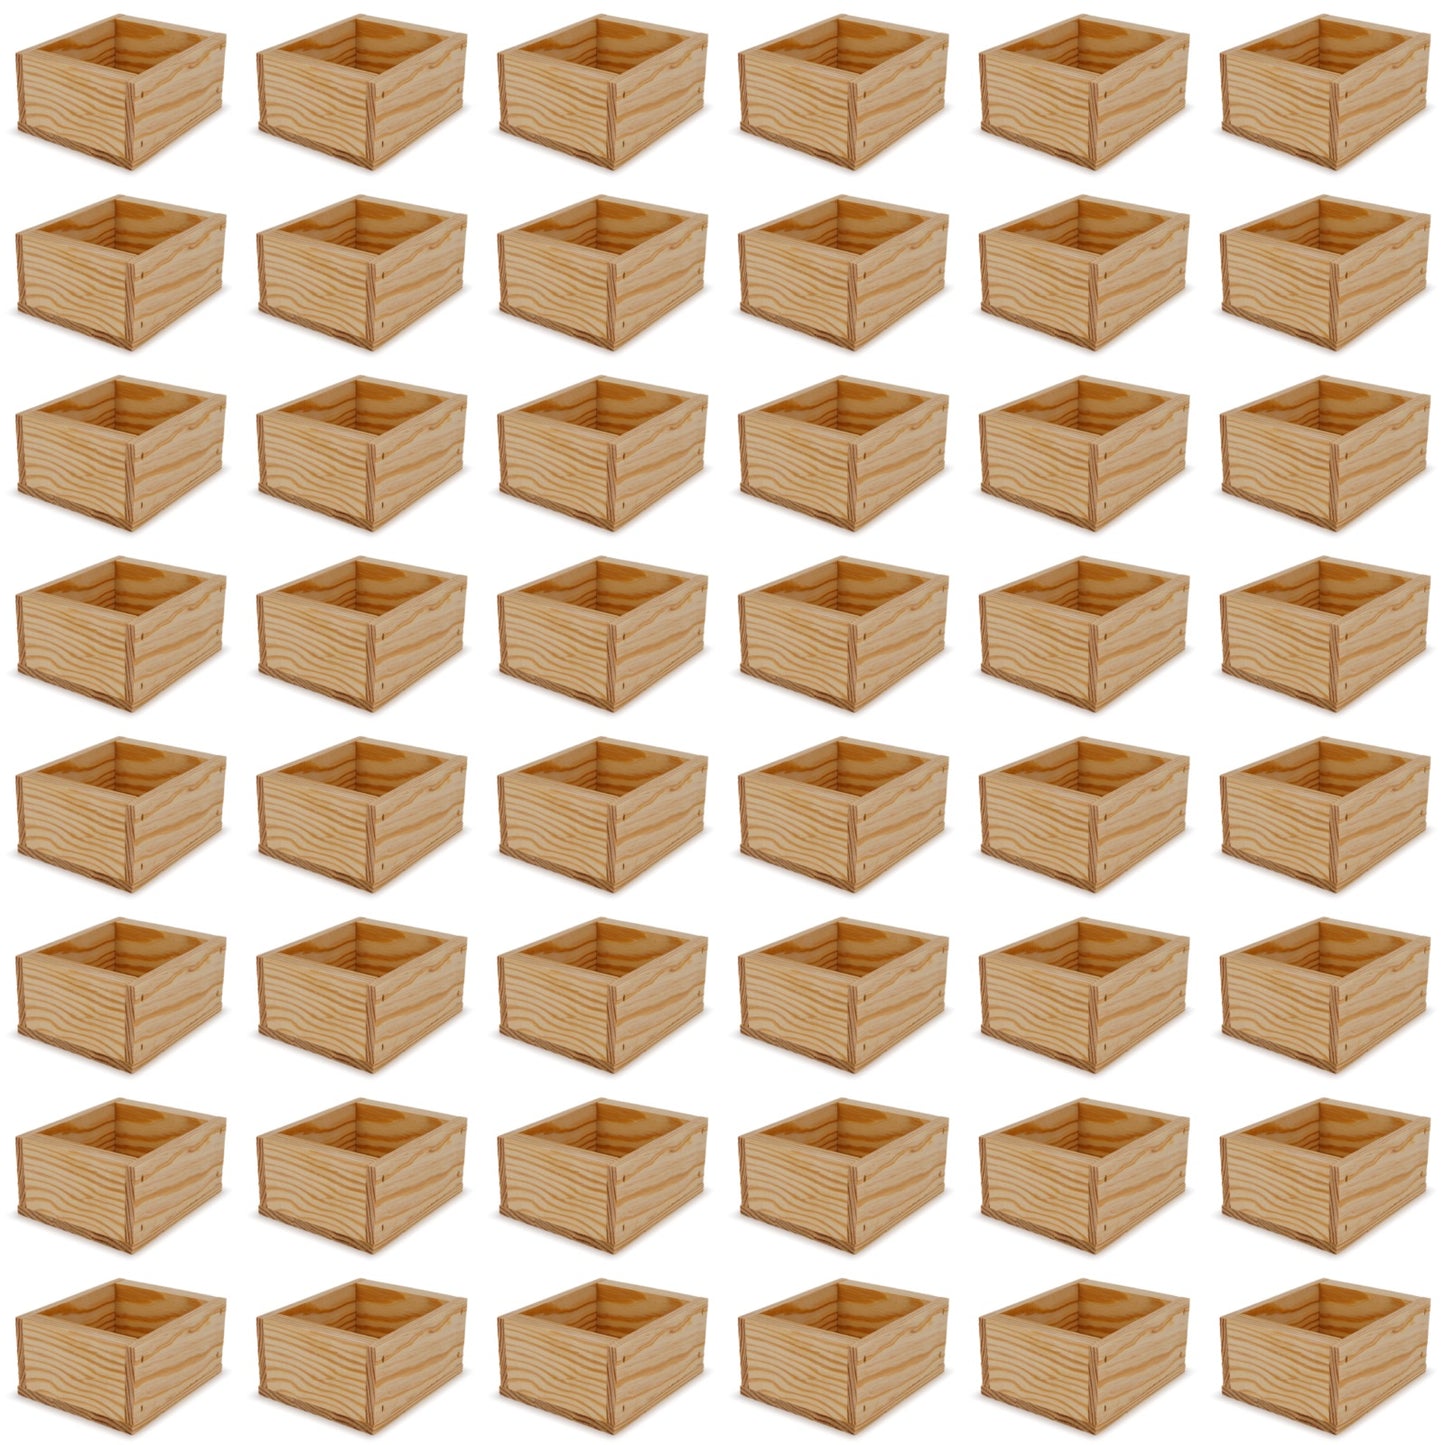 48 Small wooden crates 5x4.5x2.75